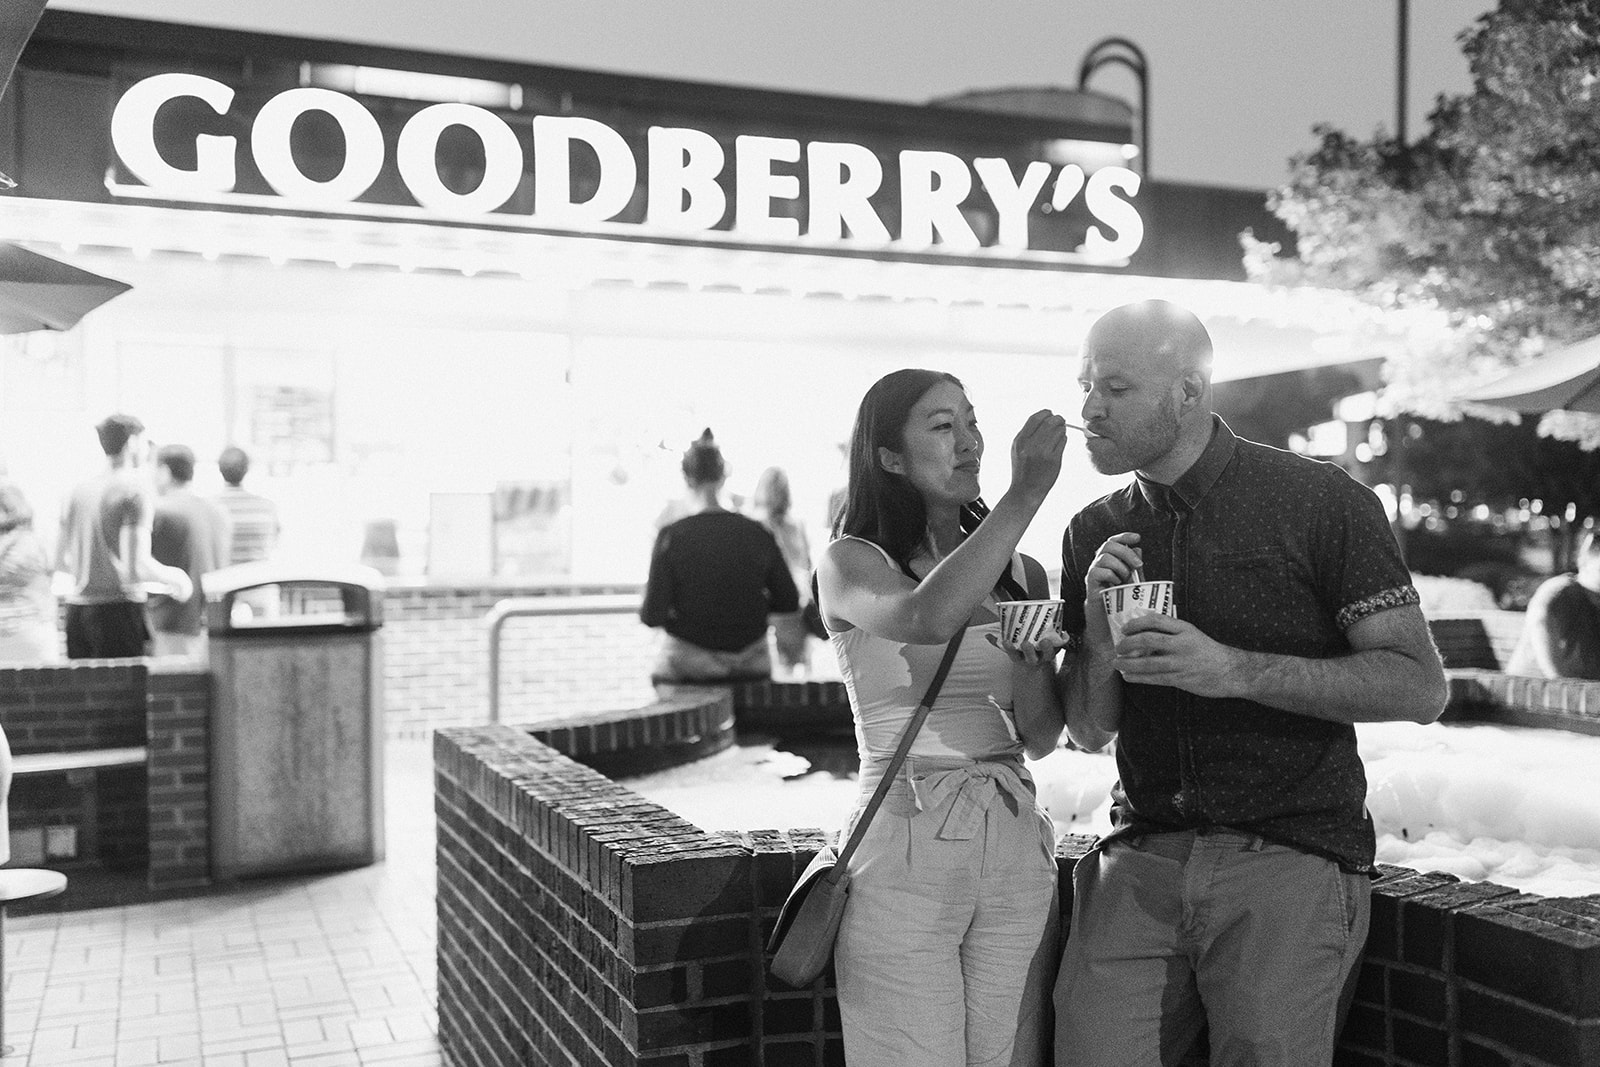 Amy Ellis Photography couples or engagement session in Downtown Raleigh and Goodberry's ice cream date, NC